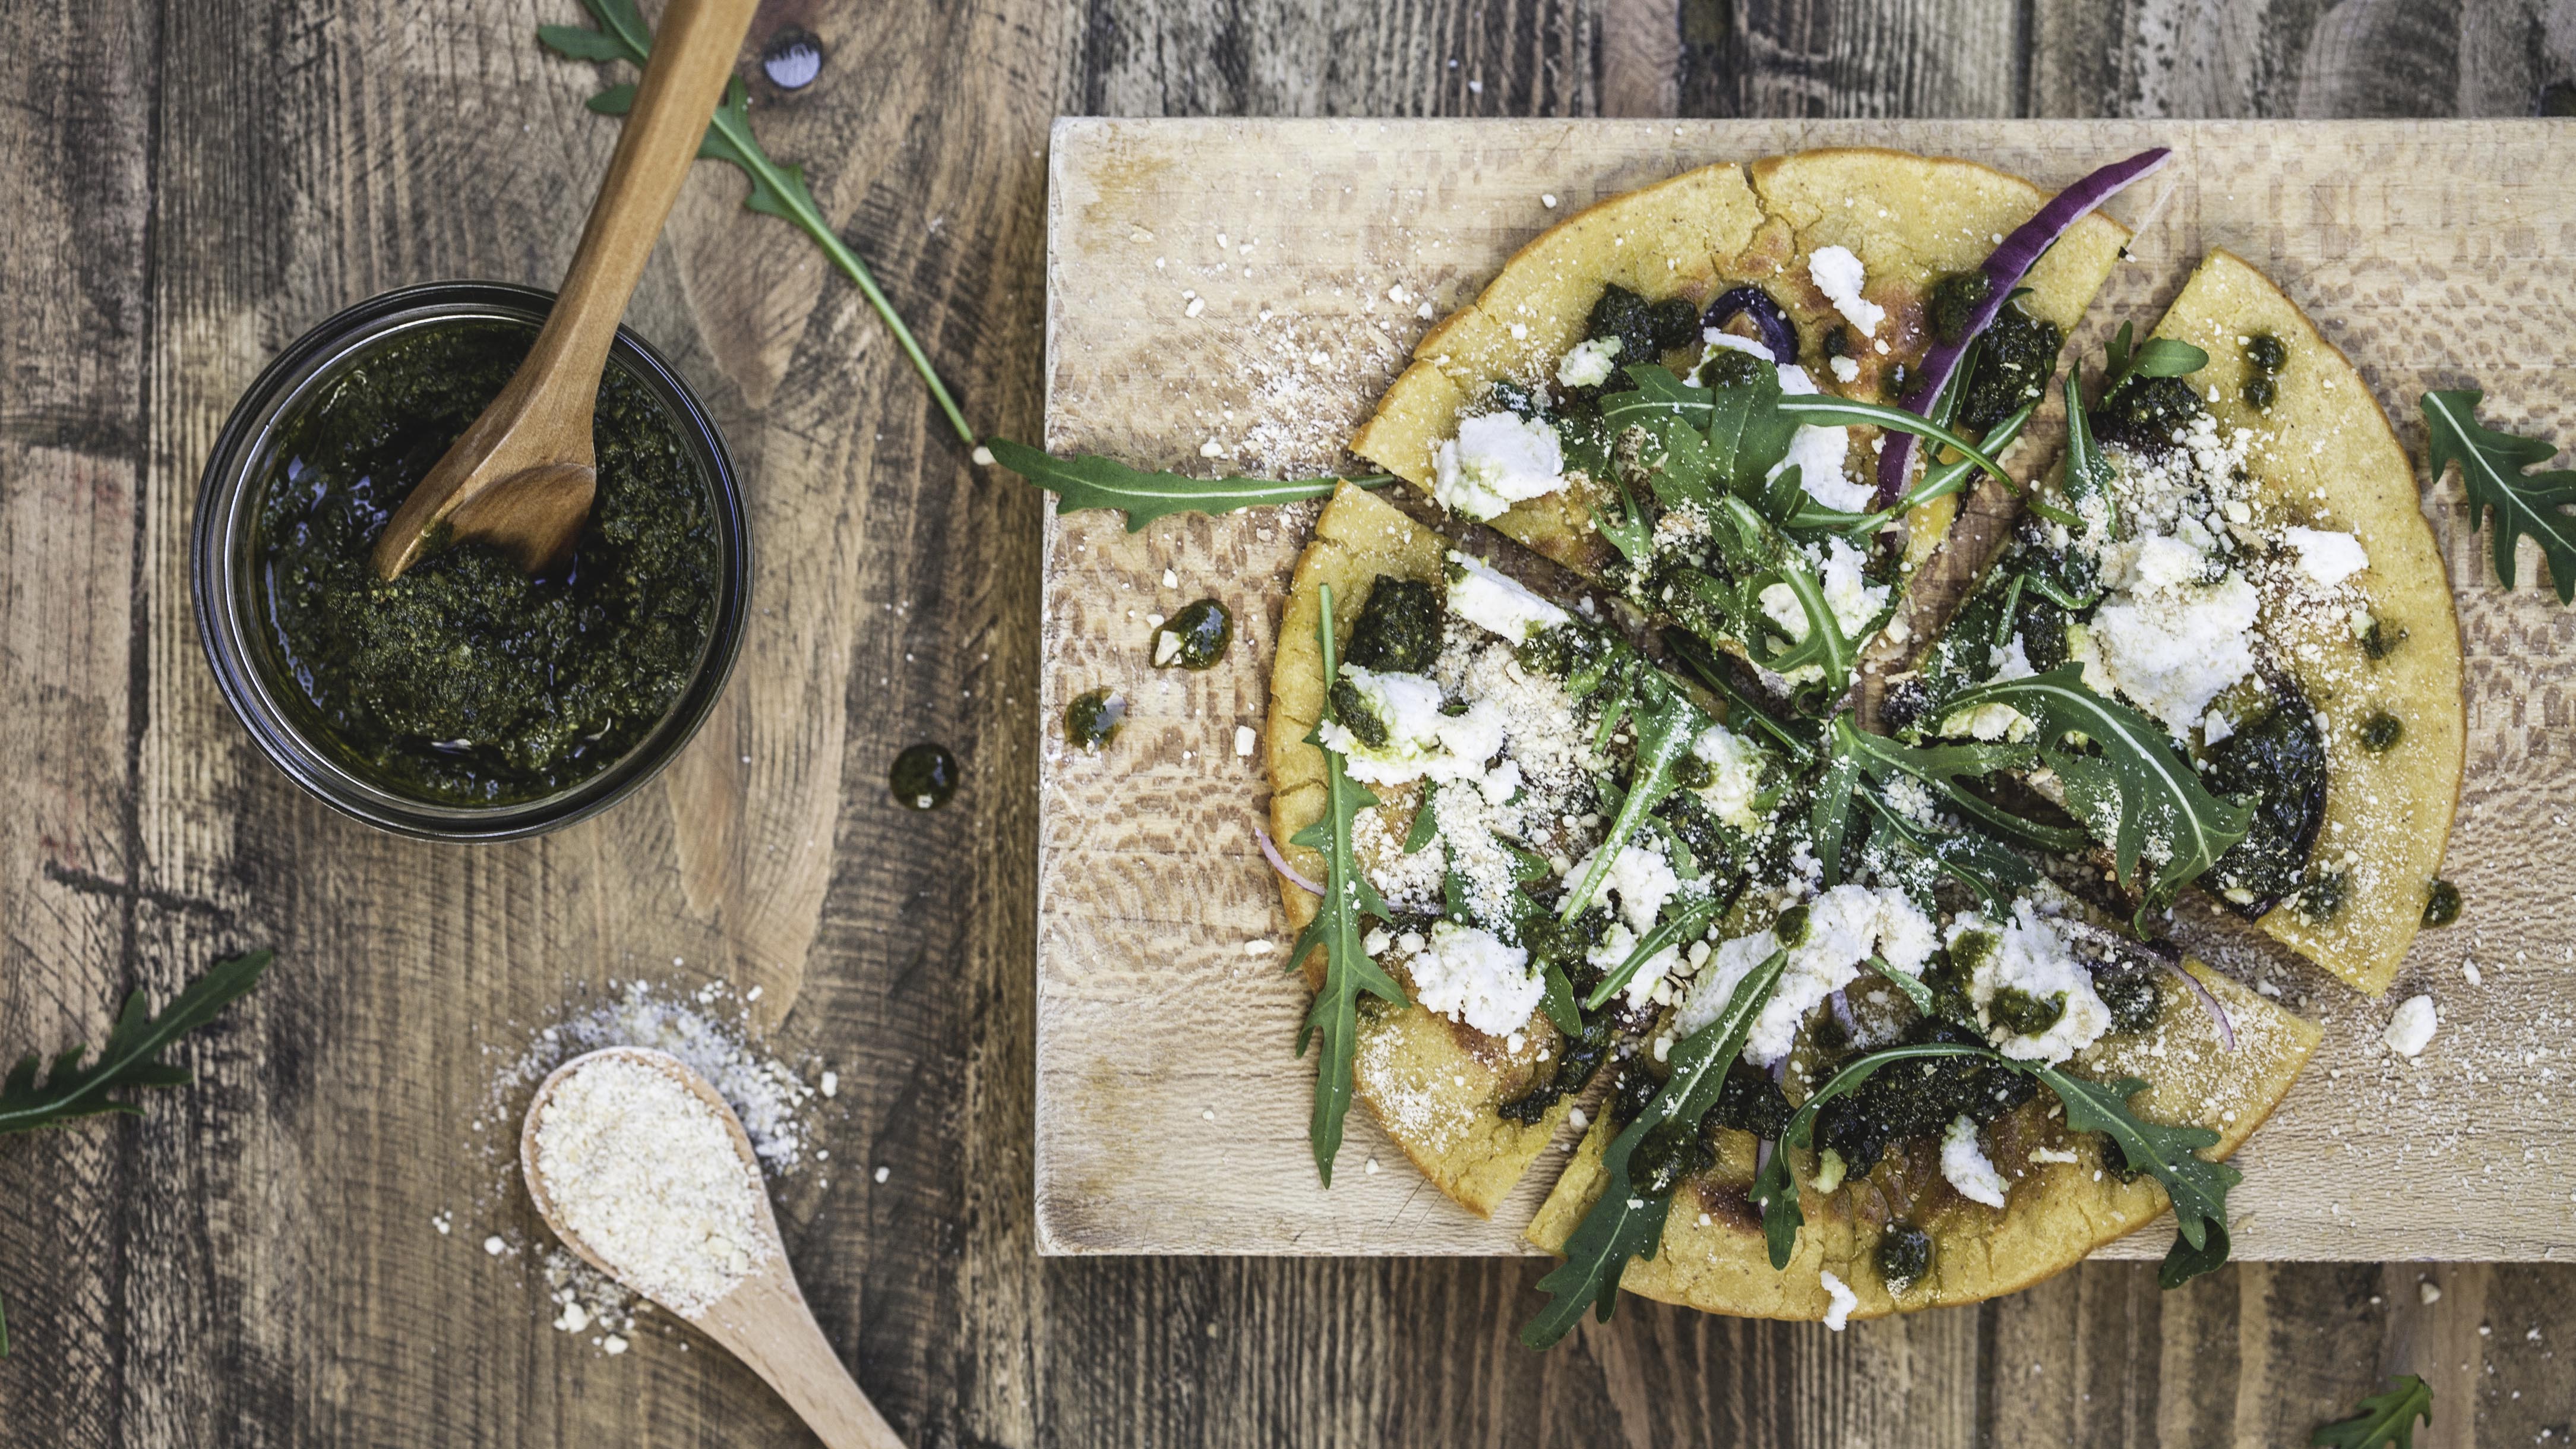 A chickpea flour based pizza, fried in a cast-iron skillet with red onions in the base and finely shredded on the top. A pesto made from carrot tops and vegan parmesan cheese is dabbed on top with smears of almond-based ricotta cheese and handfuls of wild arugula/rocket leaves.